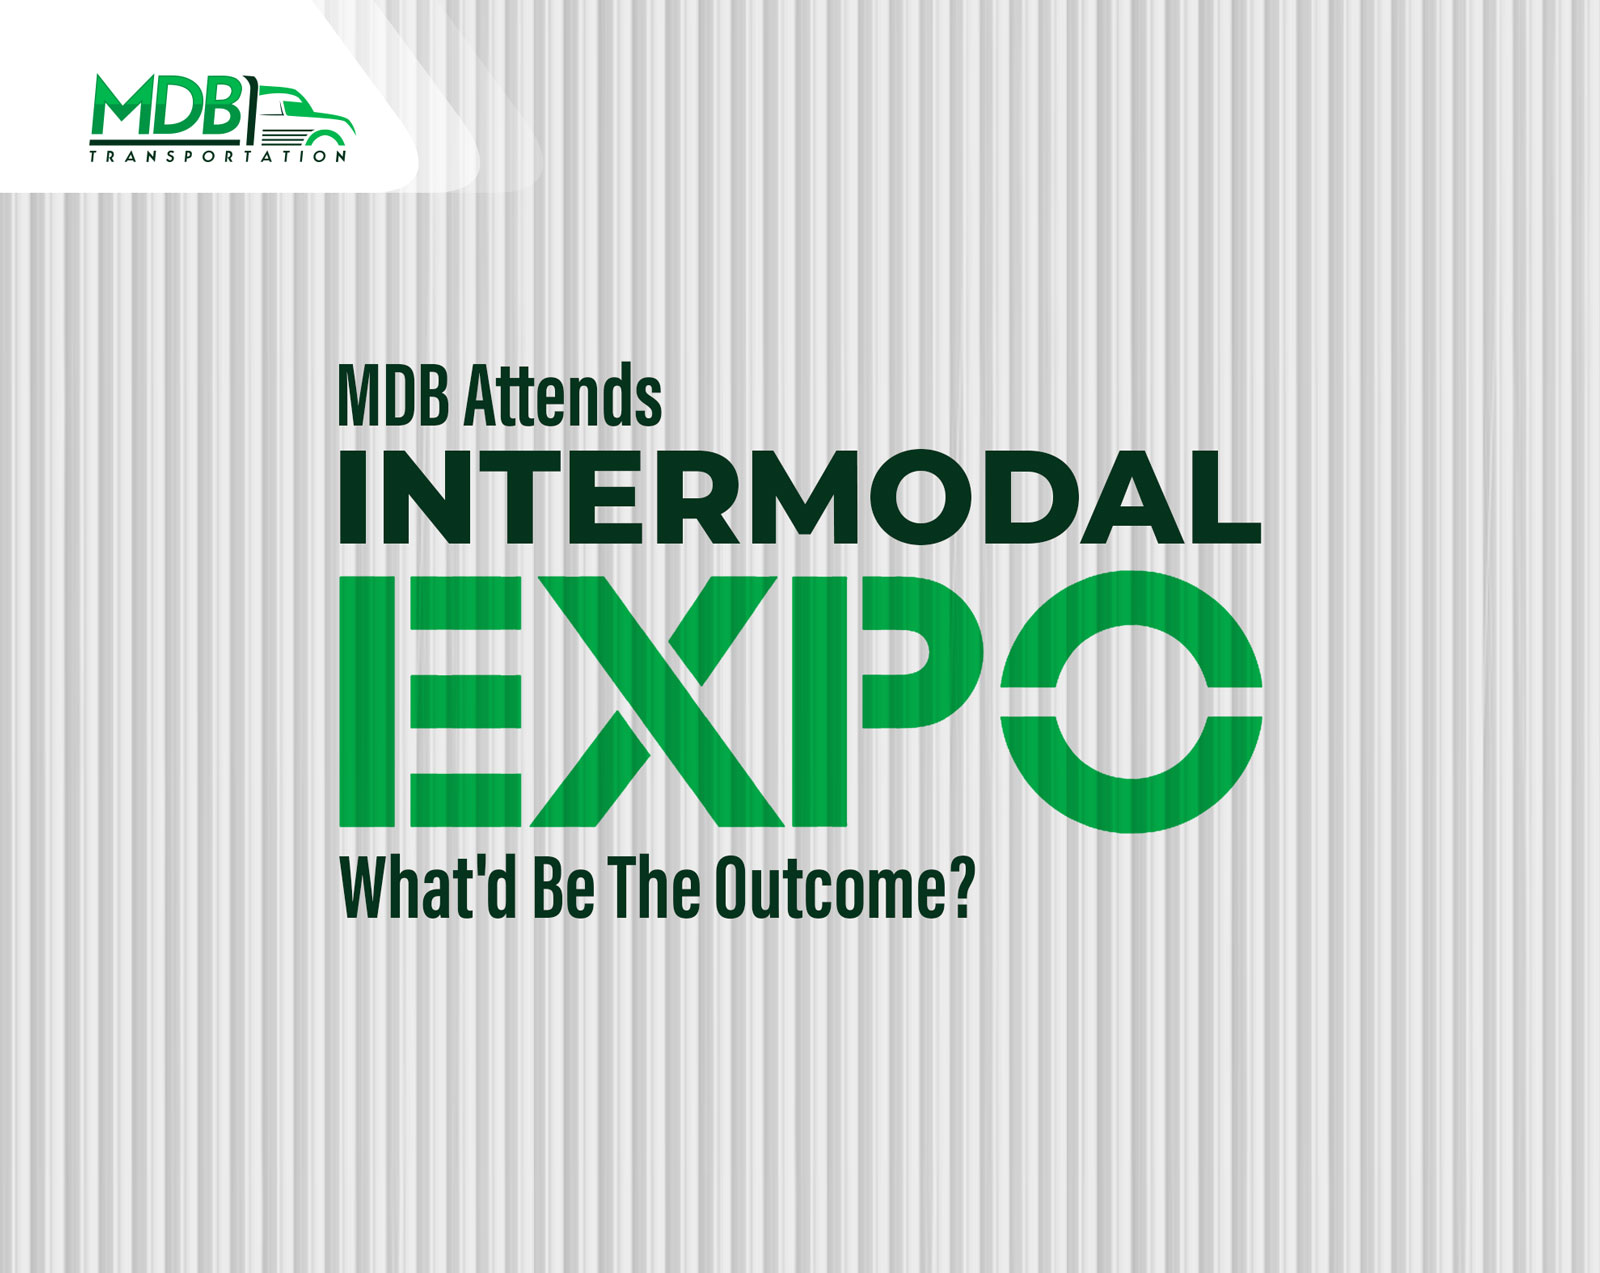 MDB Attends Intermodal Expo: What’d Be The Outcome?